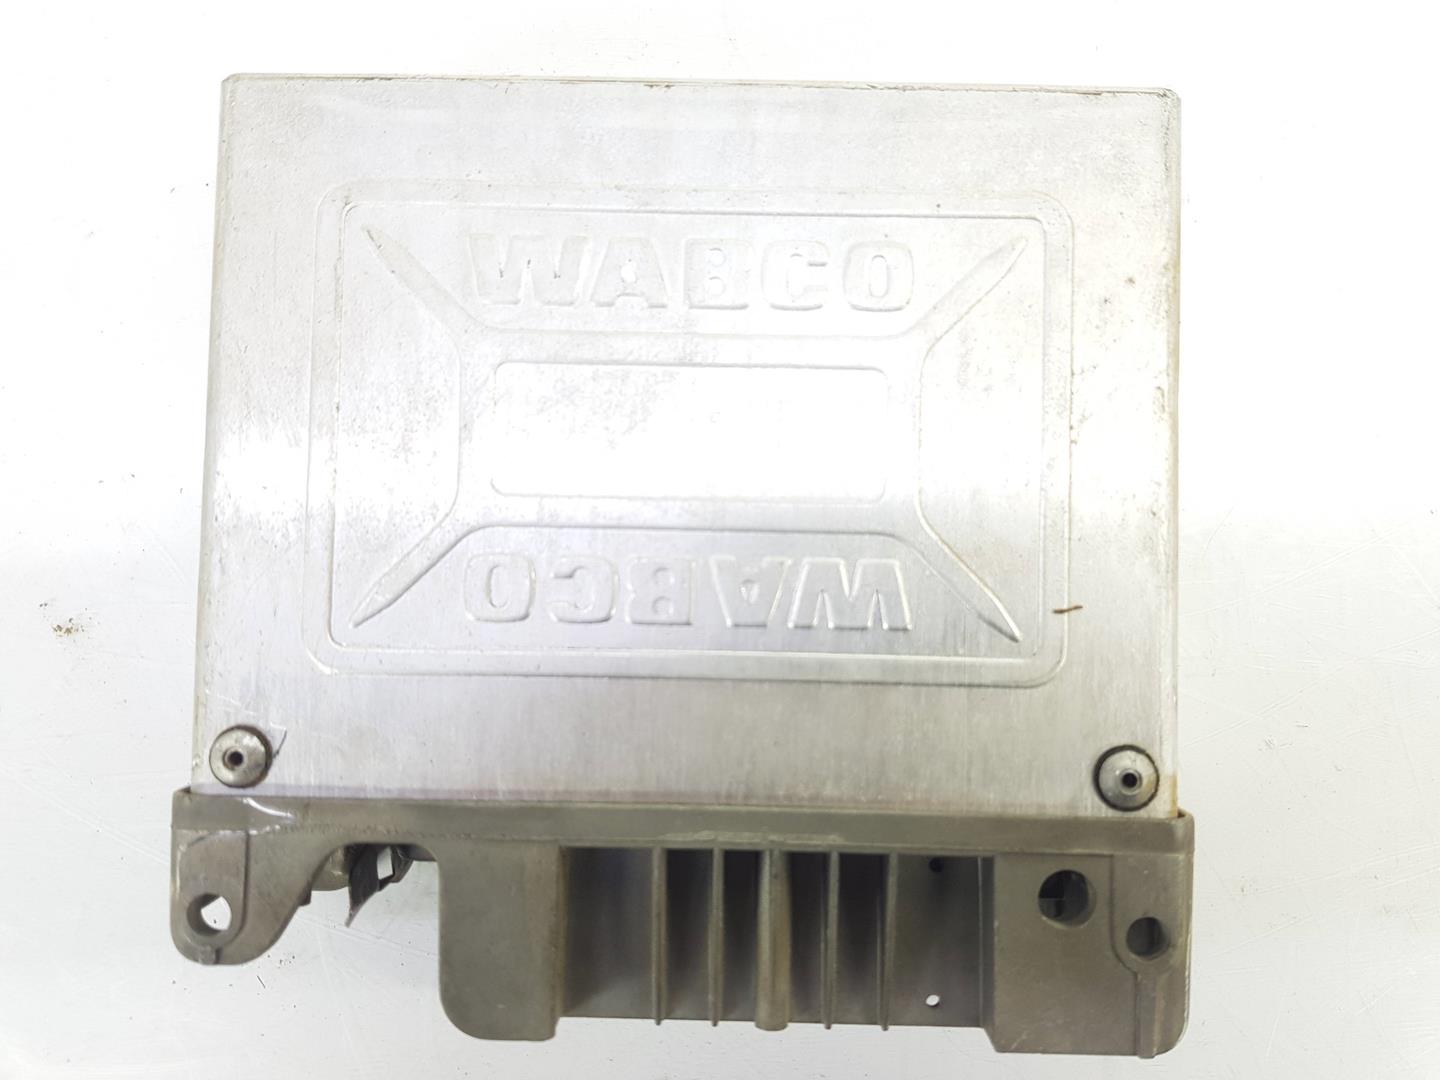 LAND ROVER Discovery 1 generation (1989-1997) Engine Control Unit ECU AMR5557, 4460440430 19804816